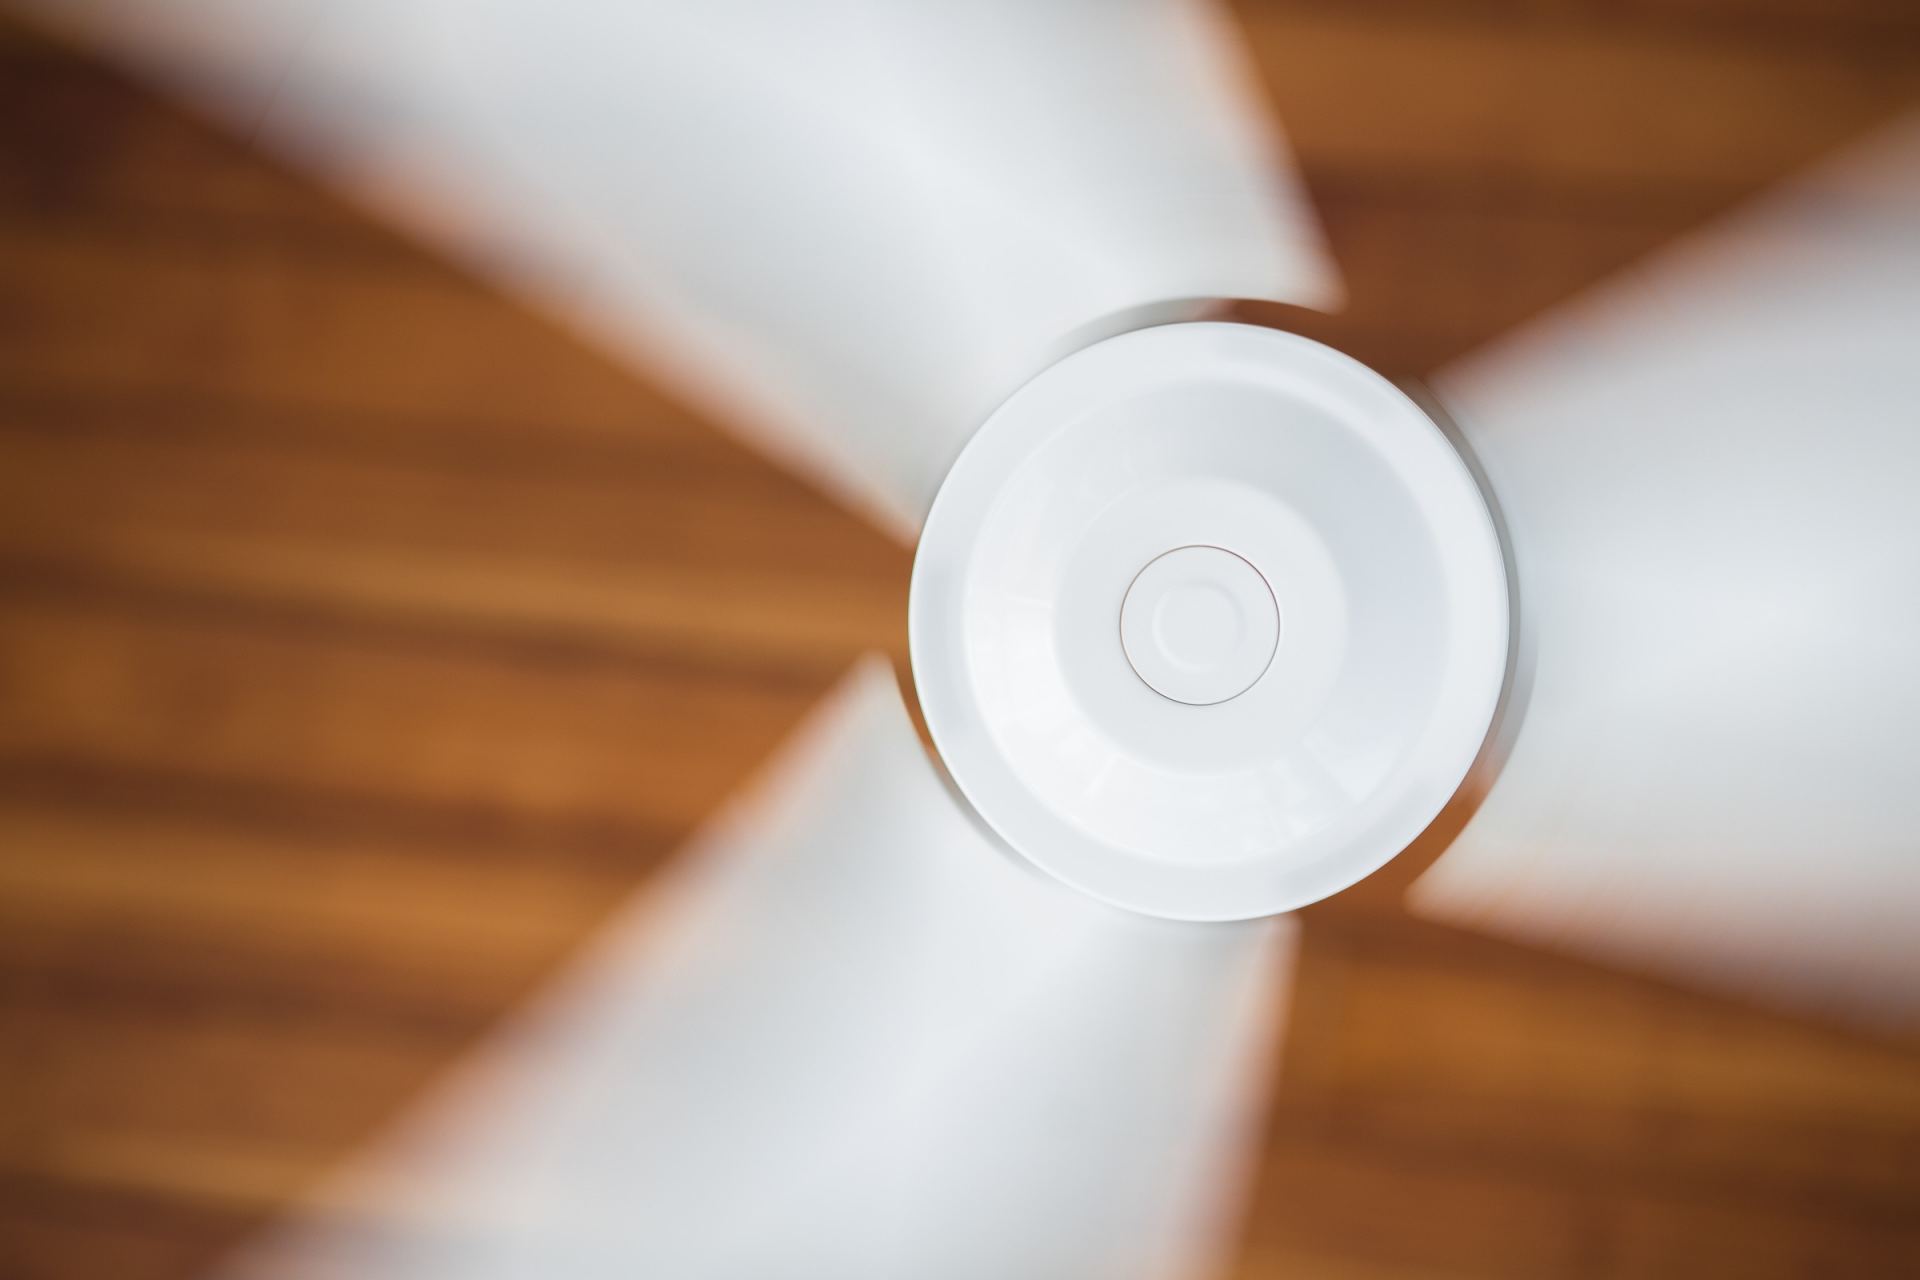 You are currently viewing Taobao Ceiling Fan Review: It’s Noisy and Sucks, But Looks Pretty